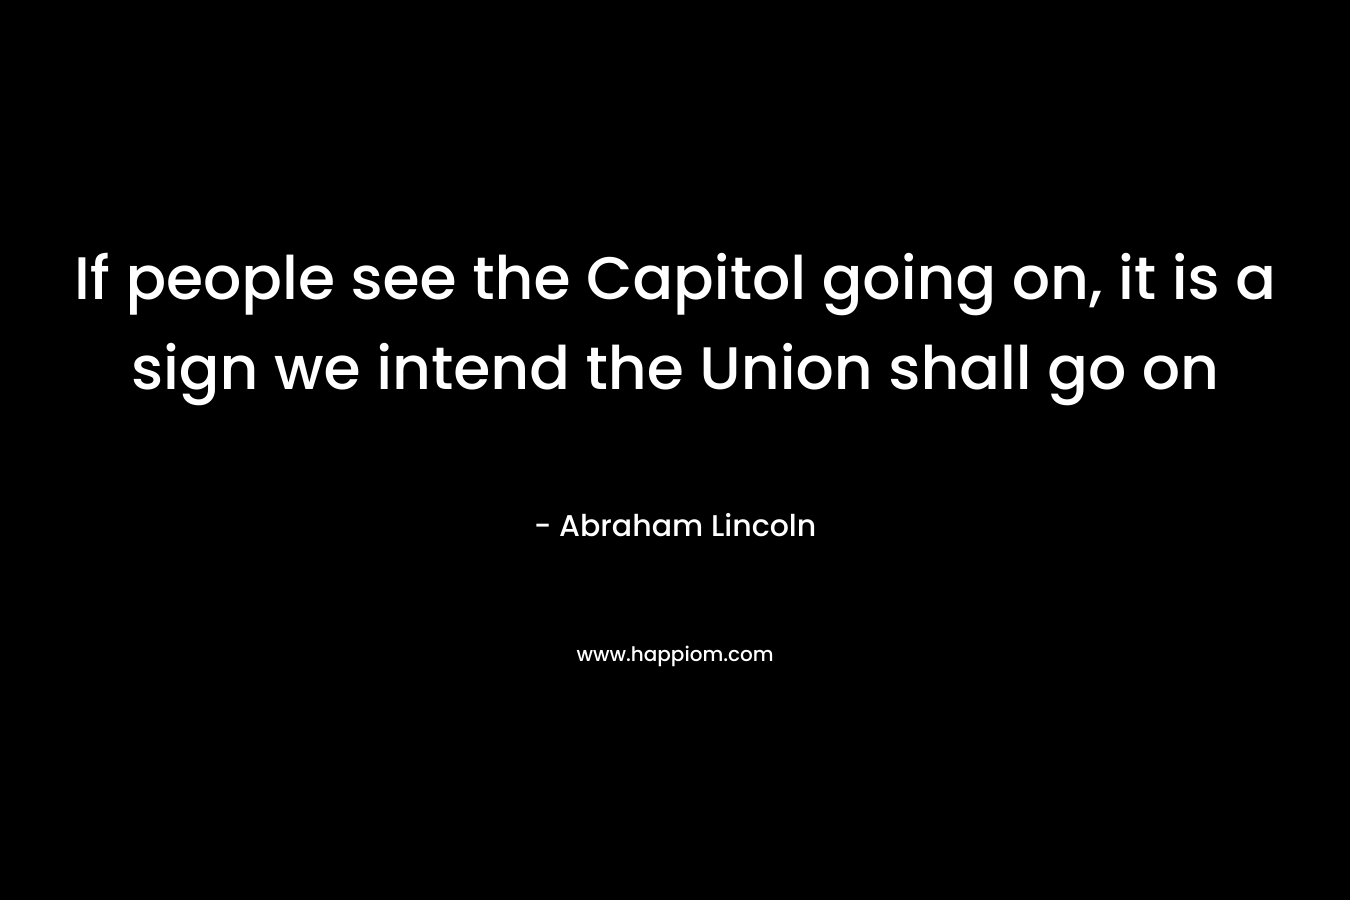 If people see the Capitol going on, it is a sign we intend the Union shall go on – Abraham Lincoln